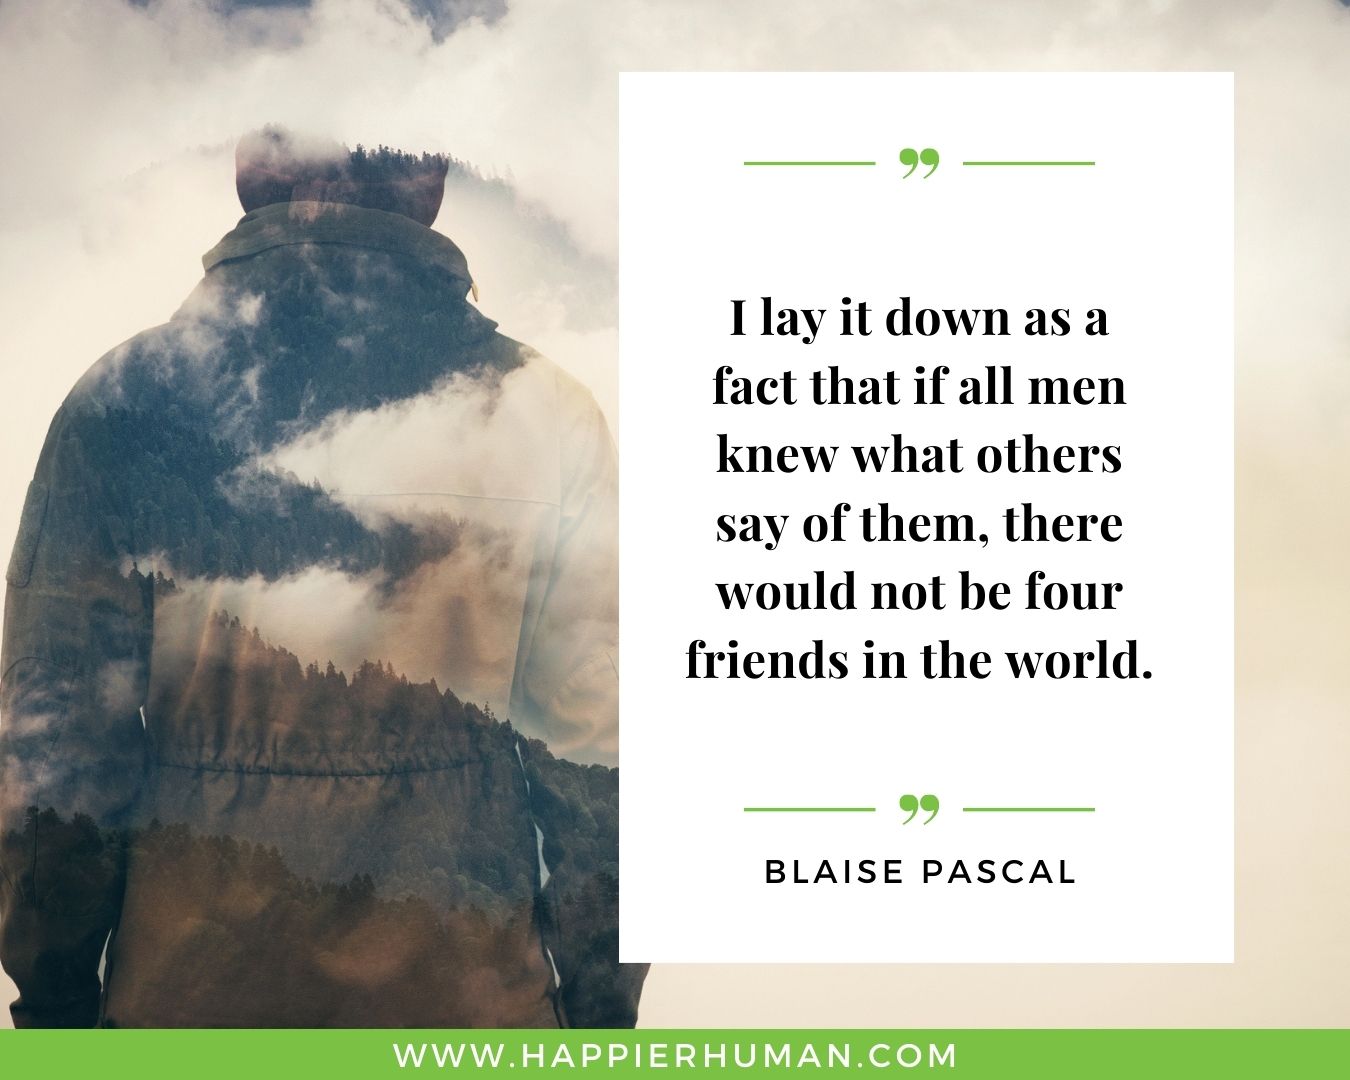 Broken Trust Quotes - “I lay it down as a fact that if all men knew what others say of them, there would not be four friends in the world.” - Blaise Pascal